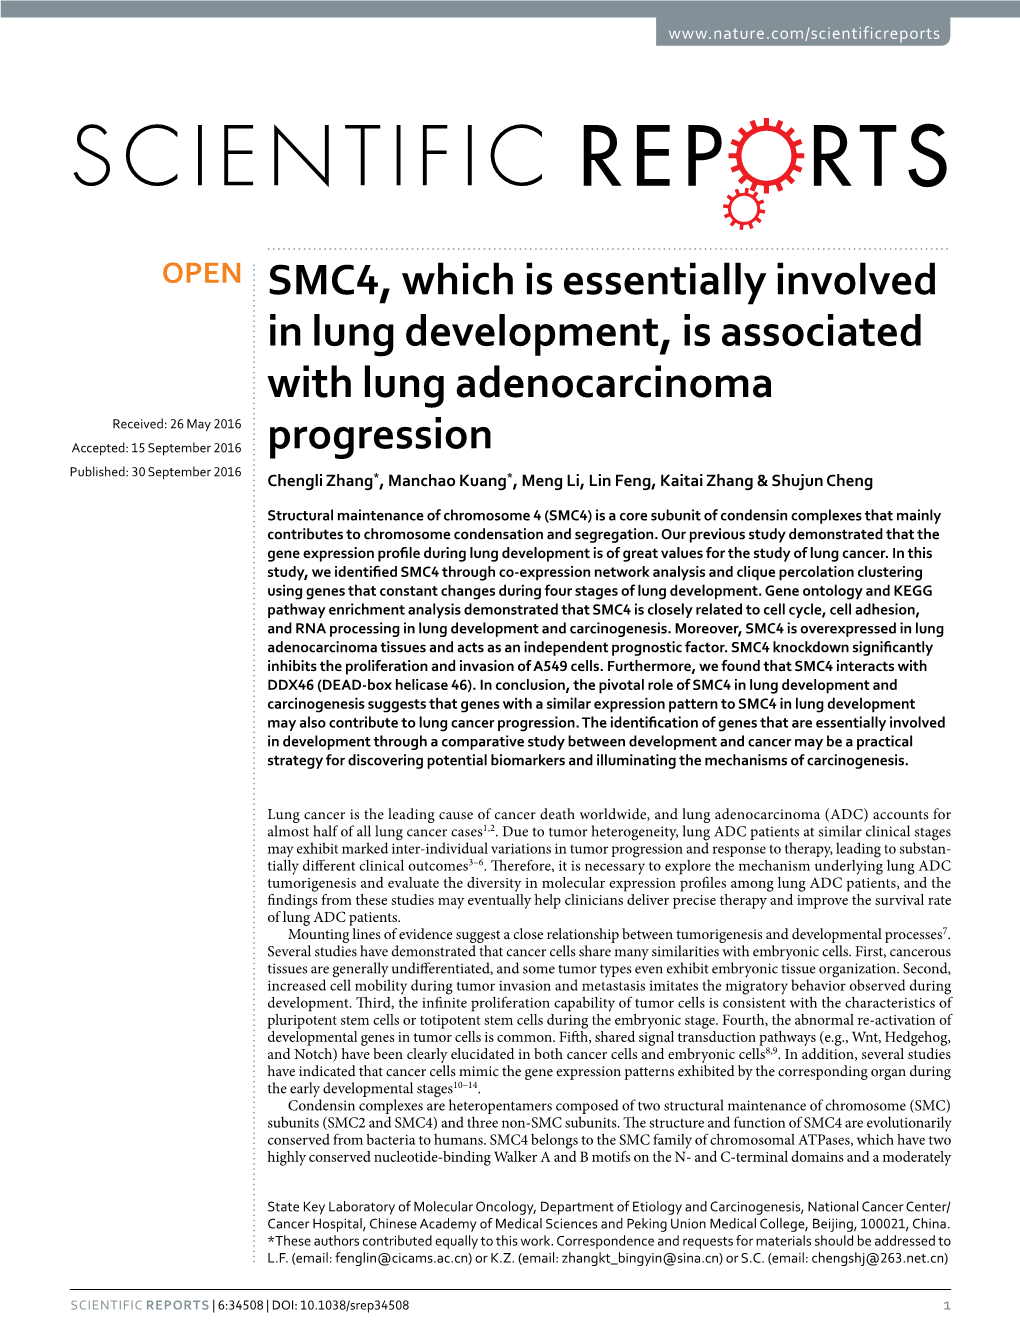 SMC4, Which Is Essentially Involved in Lung Development, Is Associated